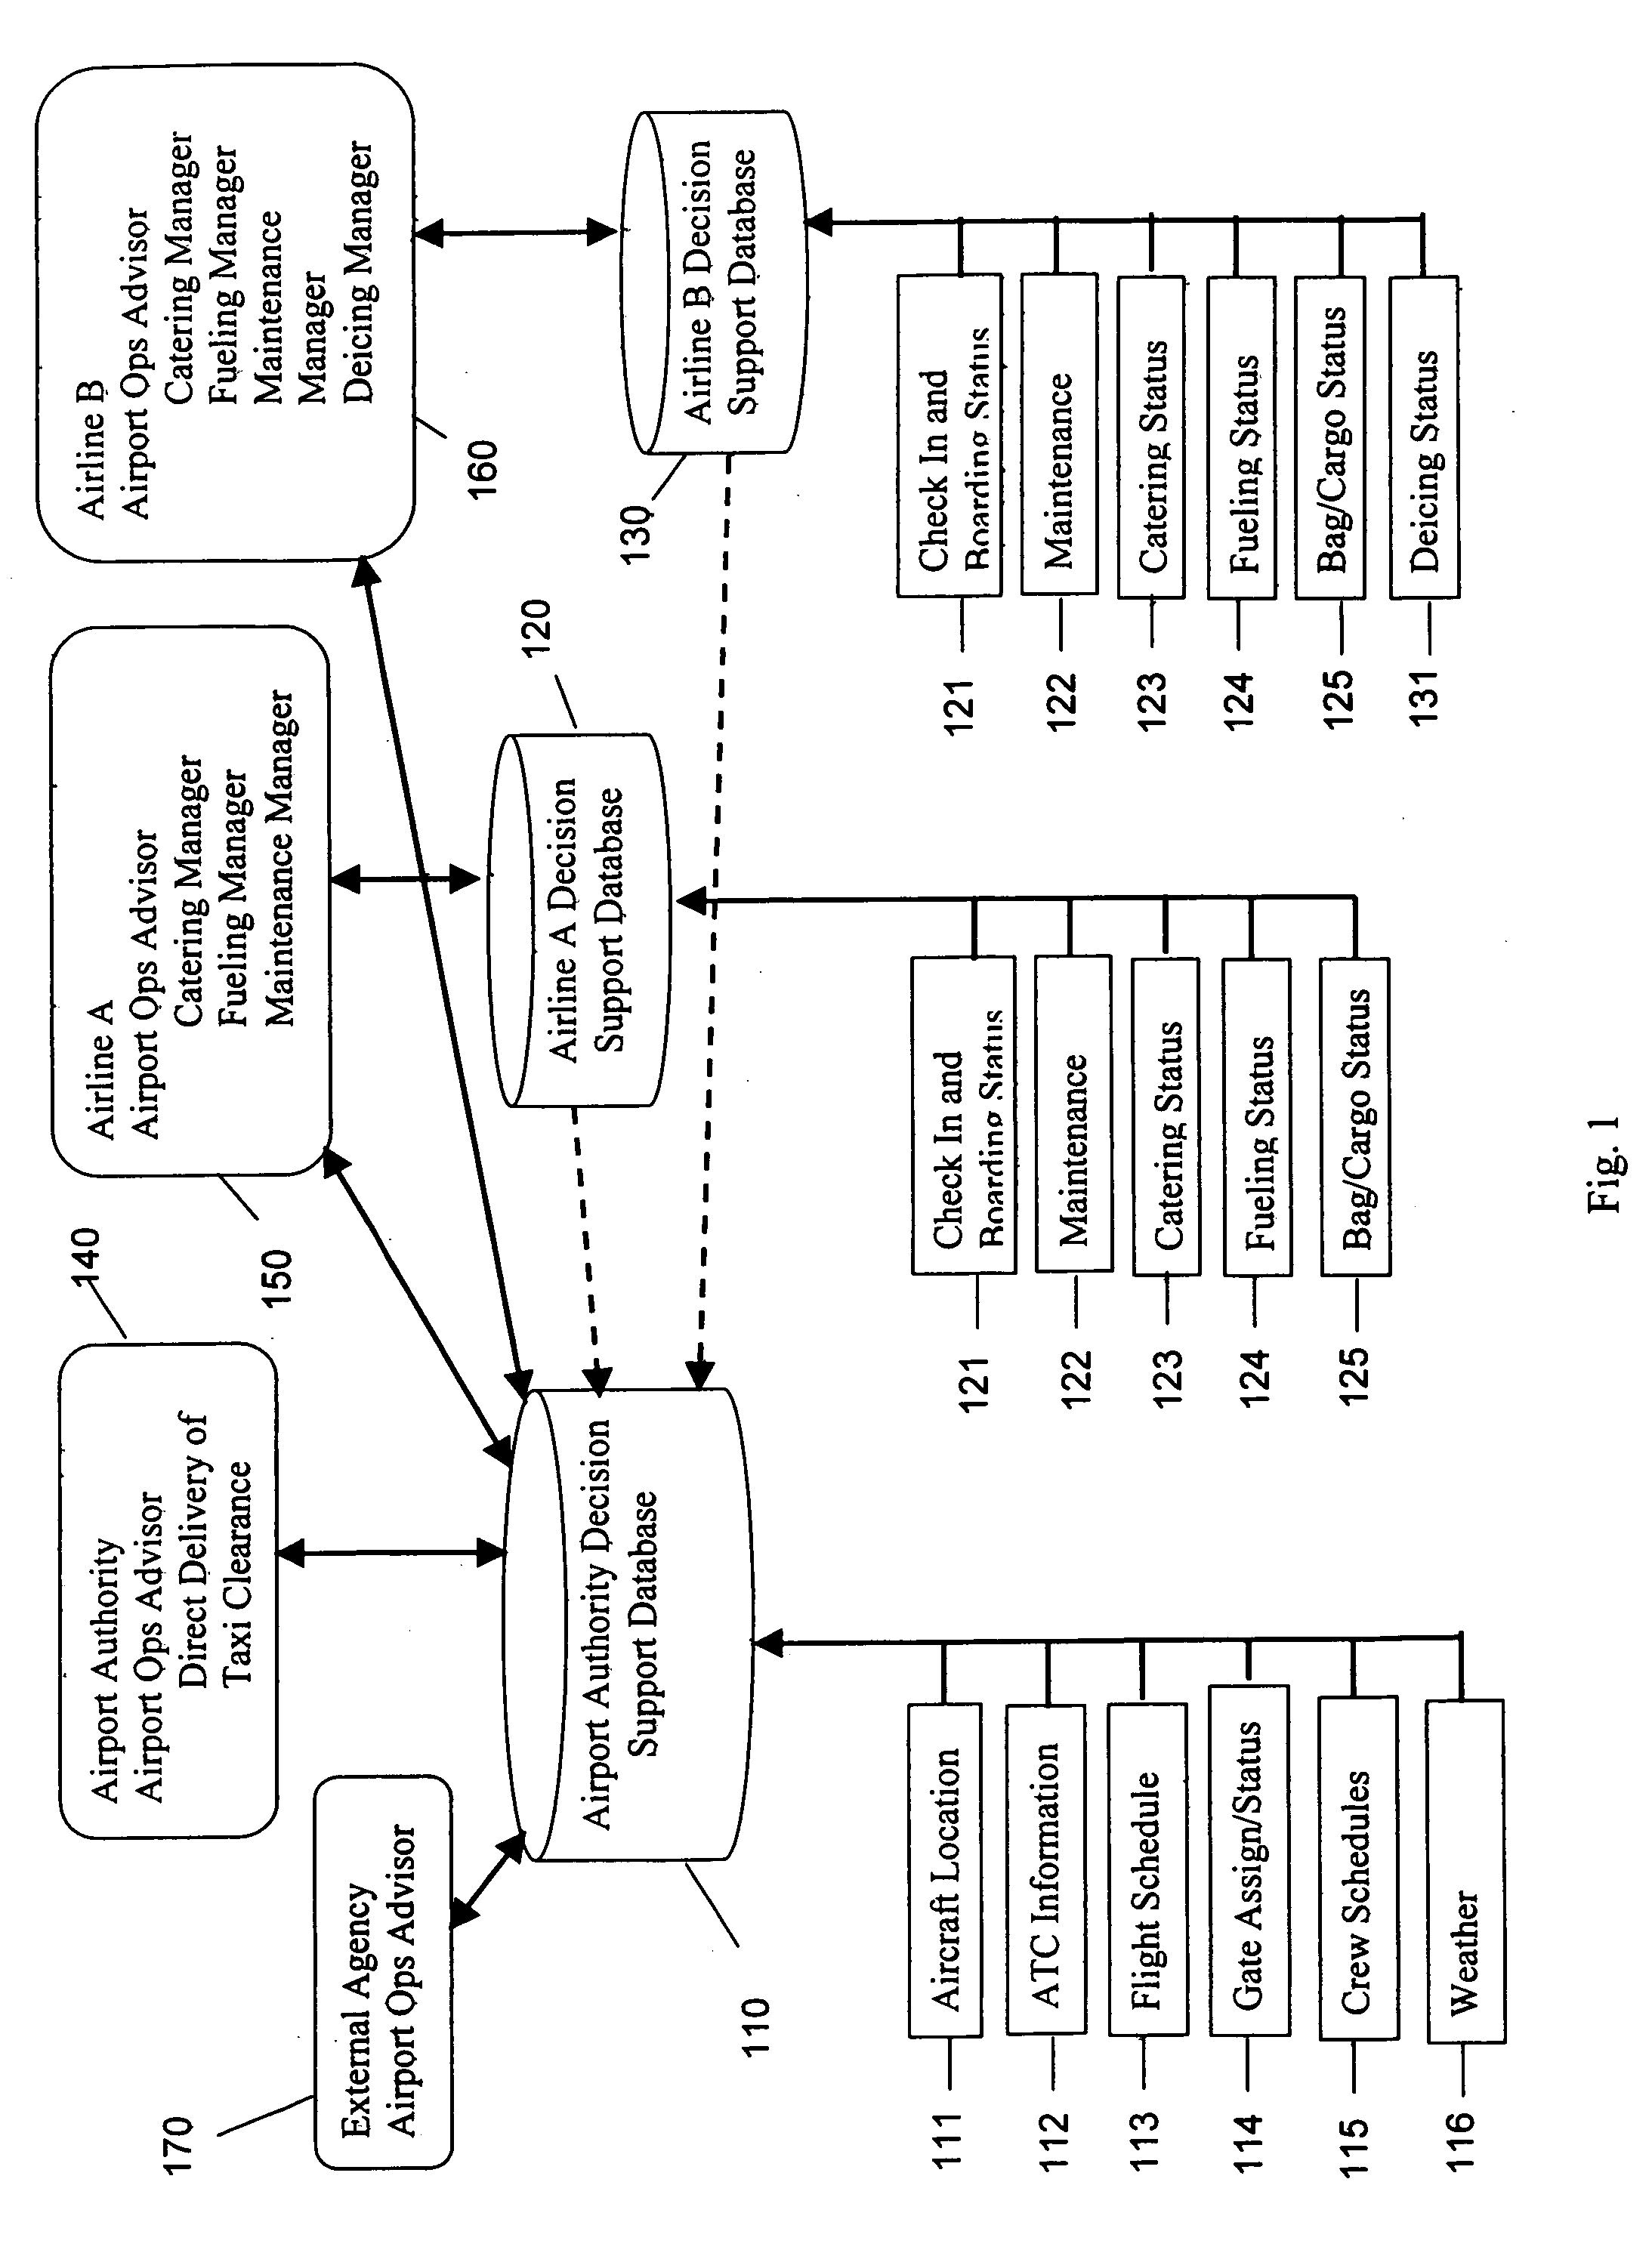 Systems and methods for managing airport operations